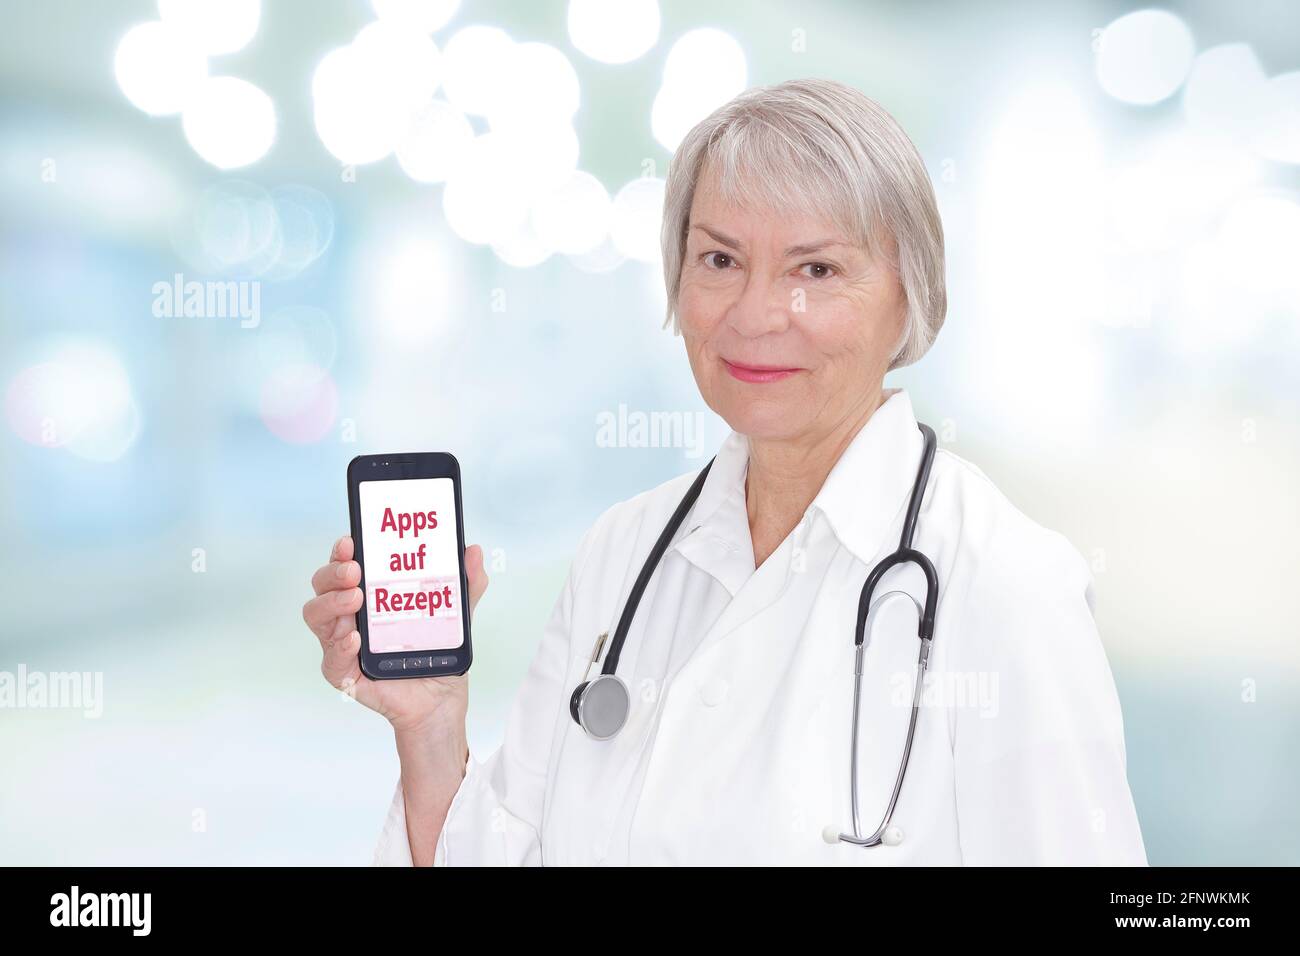 Smiling senior doctor with a smartphone showing the german text Apps auf Rezept. Translation: app on prescription. Stock Photo